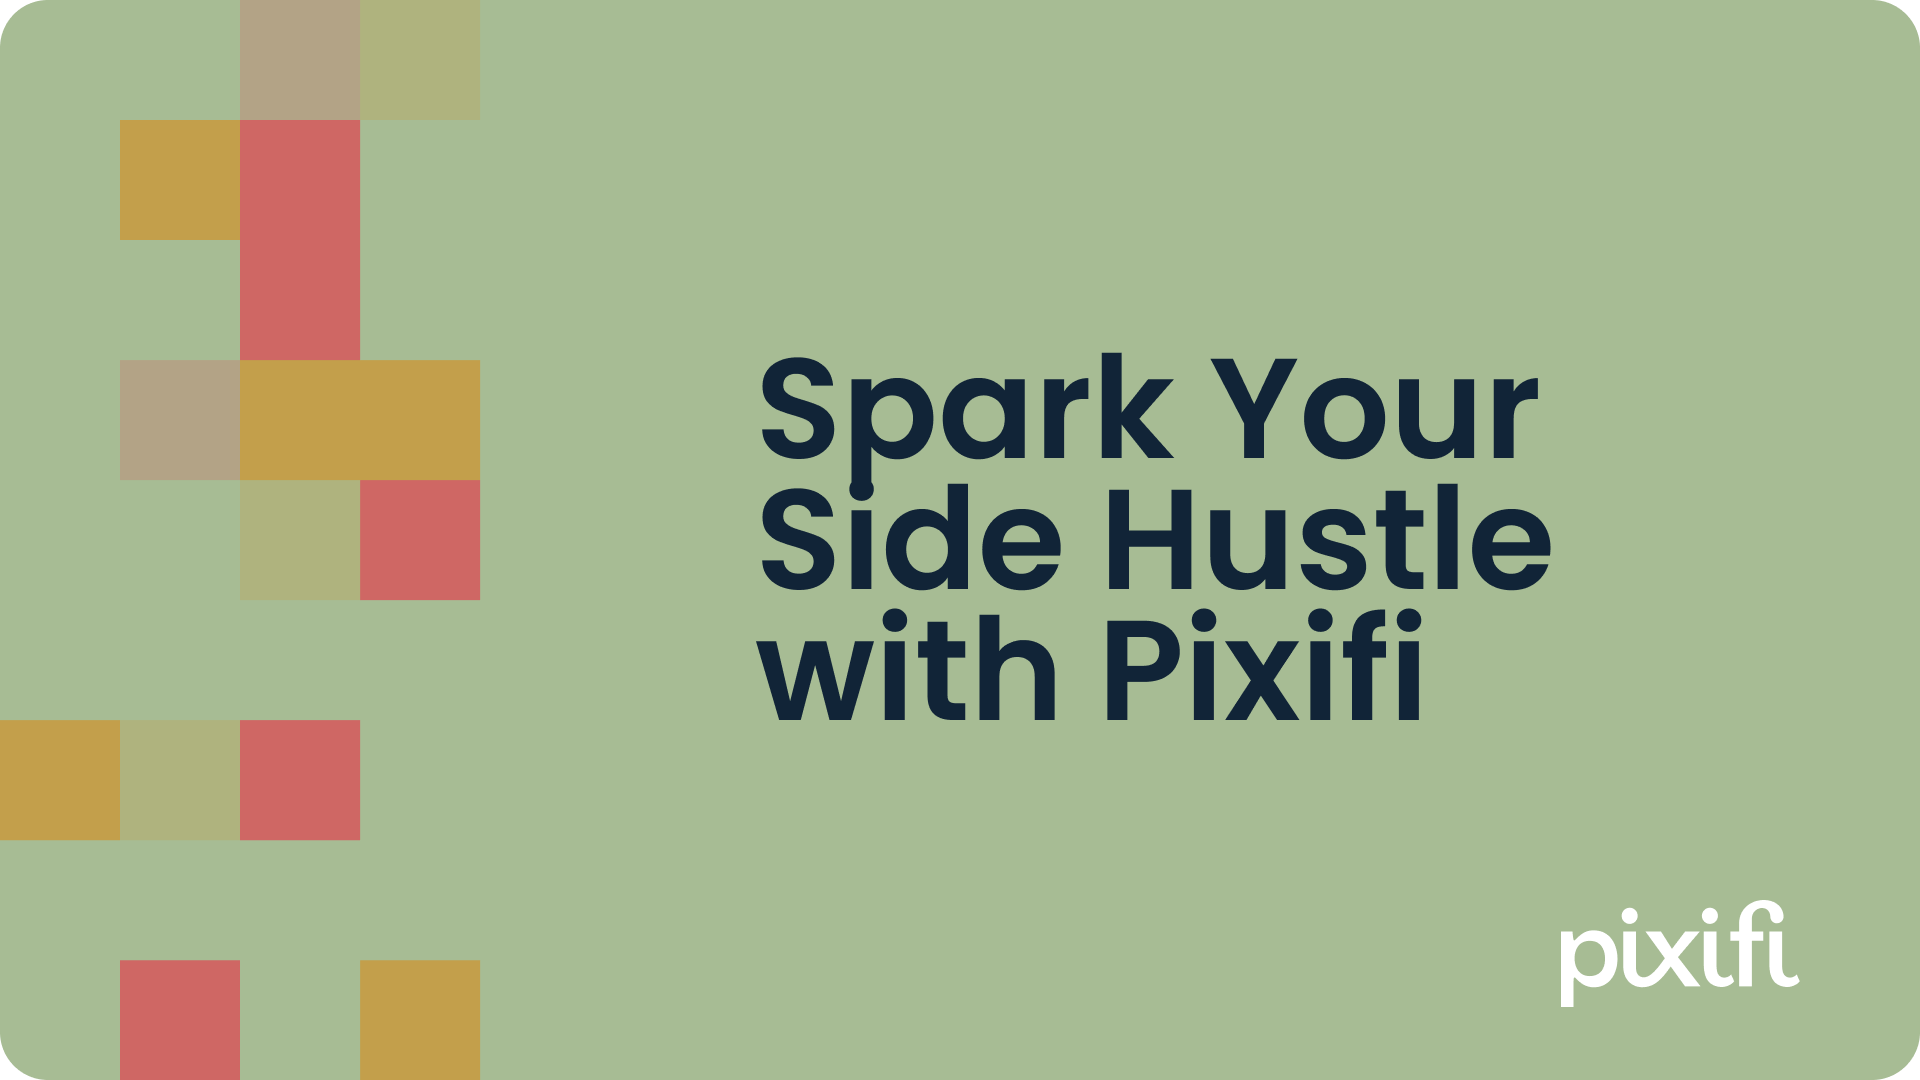 Spark Your Side Hustle with Pixifi